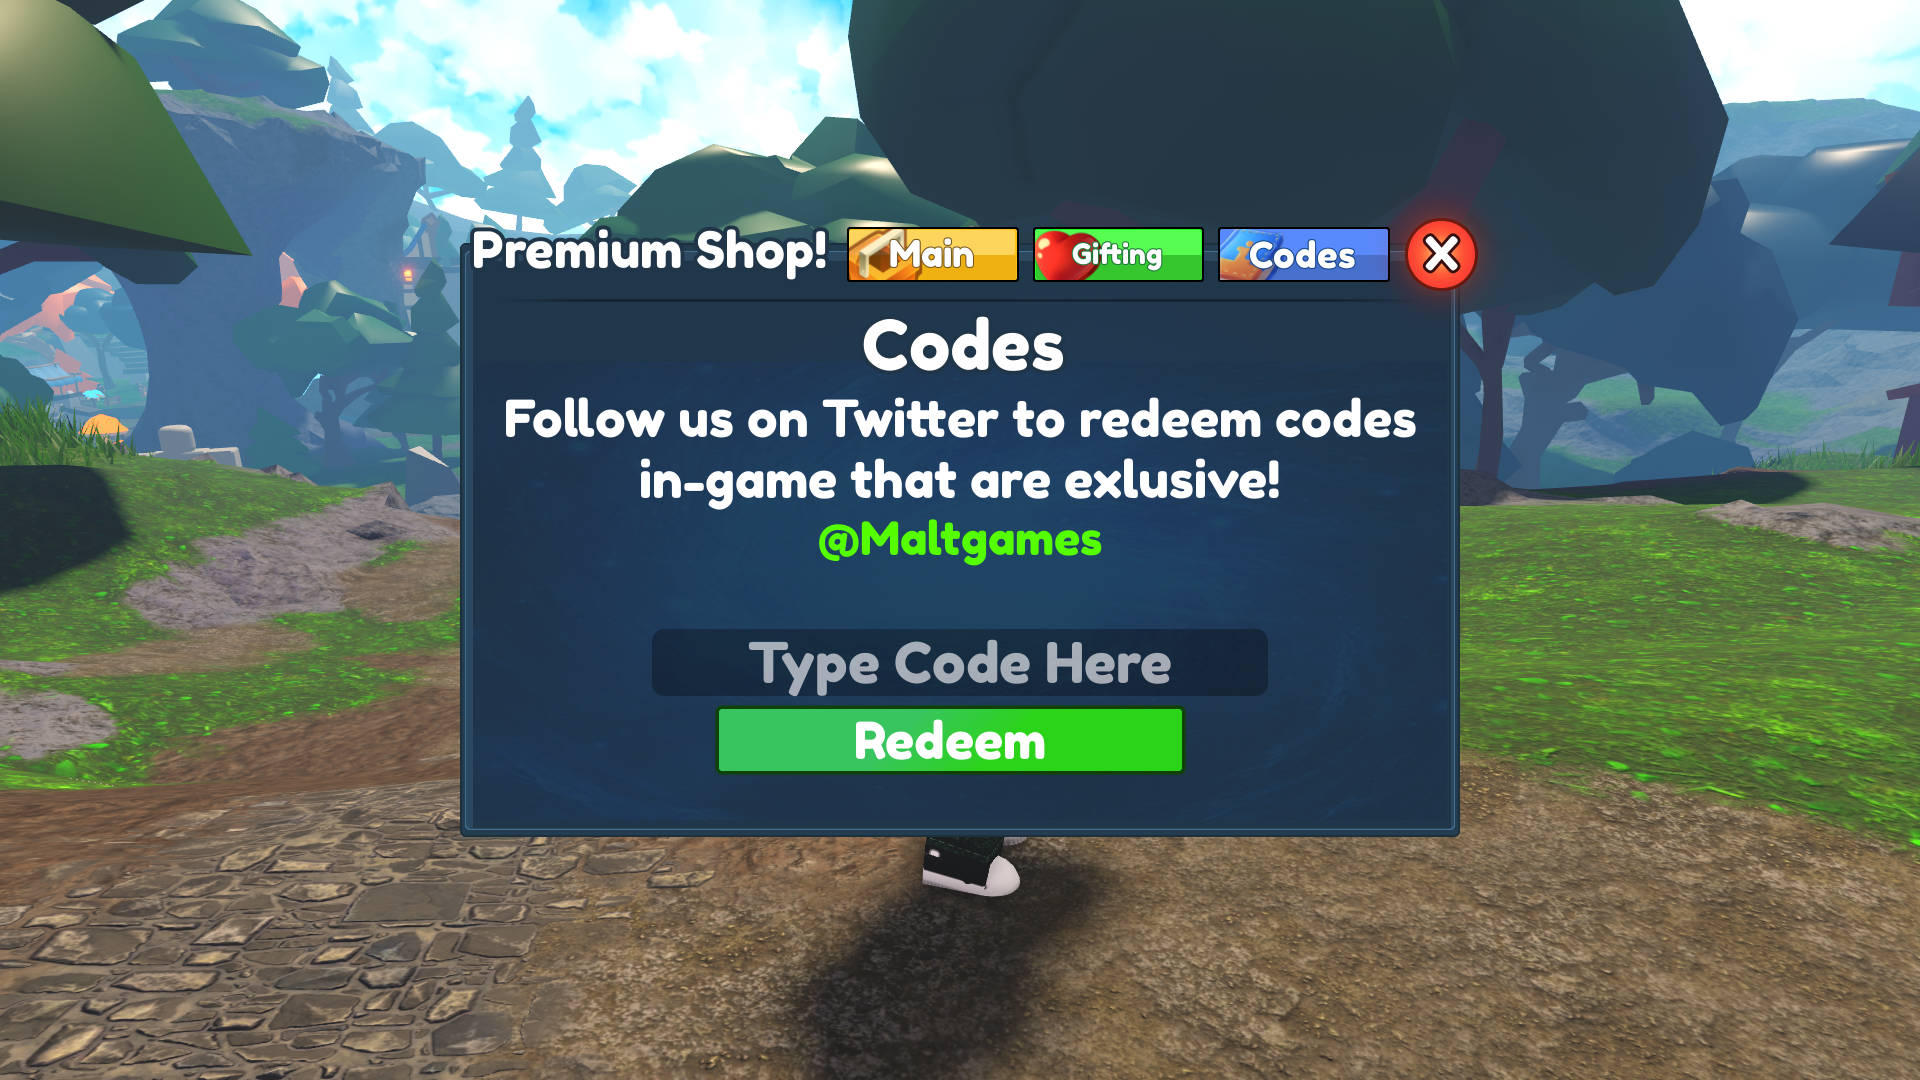 Dungeon of Gods codes for free gems (December 2023)